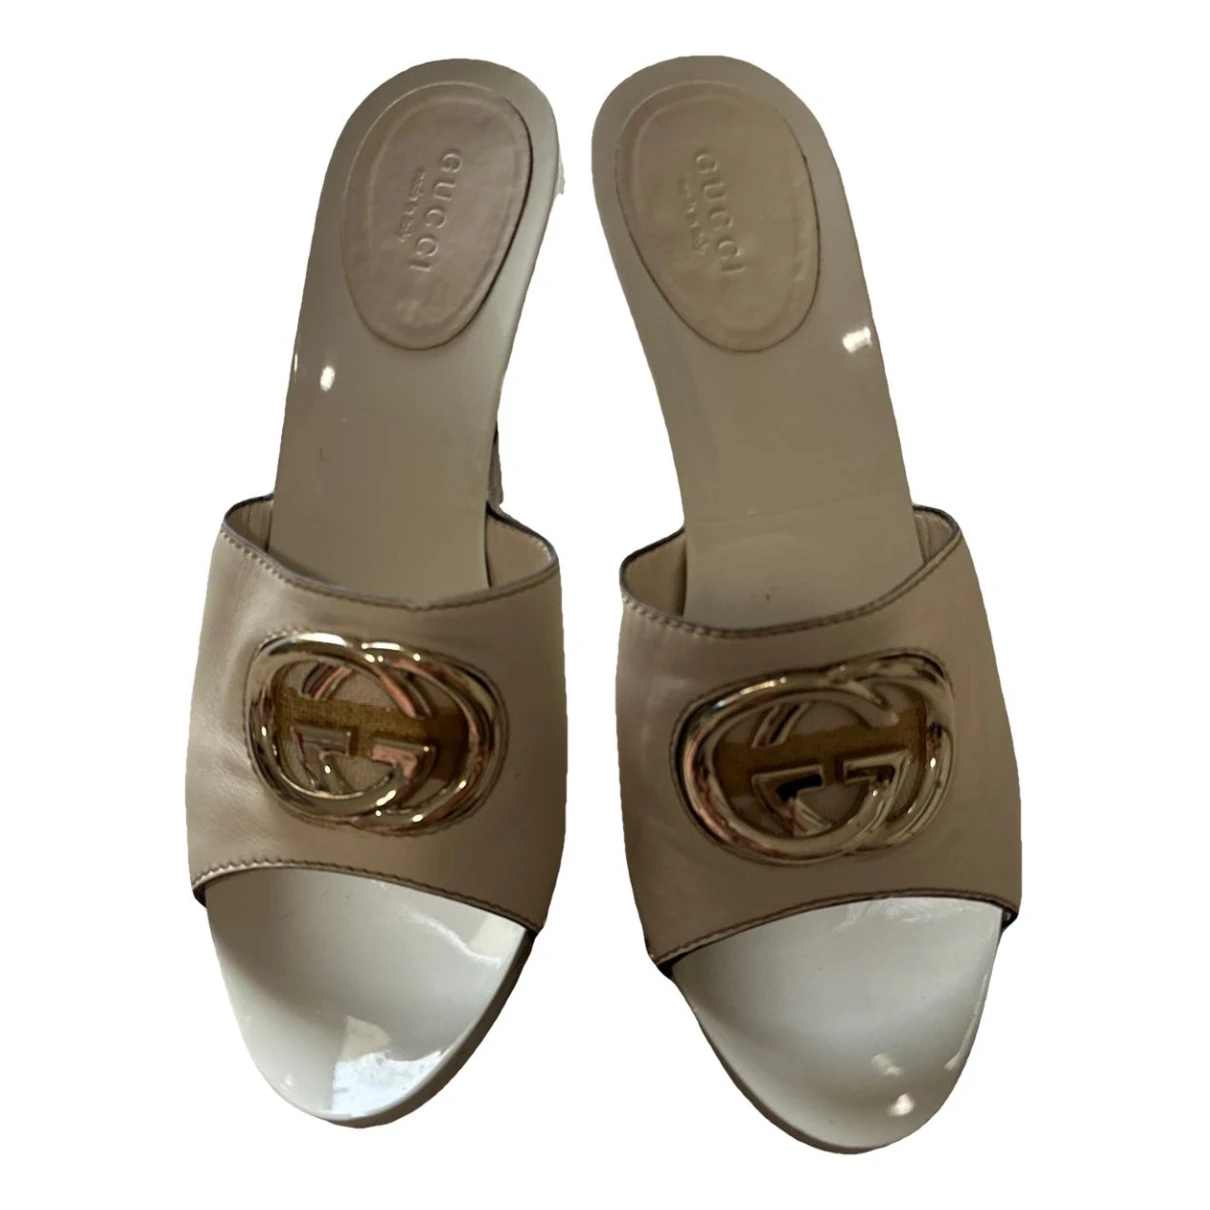 shoes Gucci mules & clogs for Female Leather 38 EU. Used condition